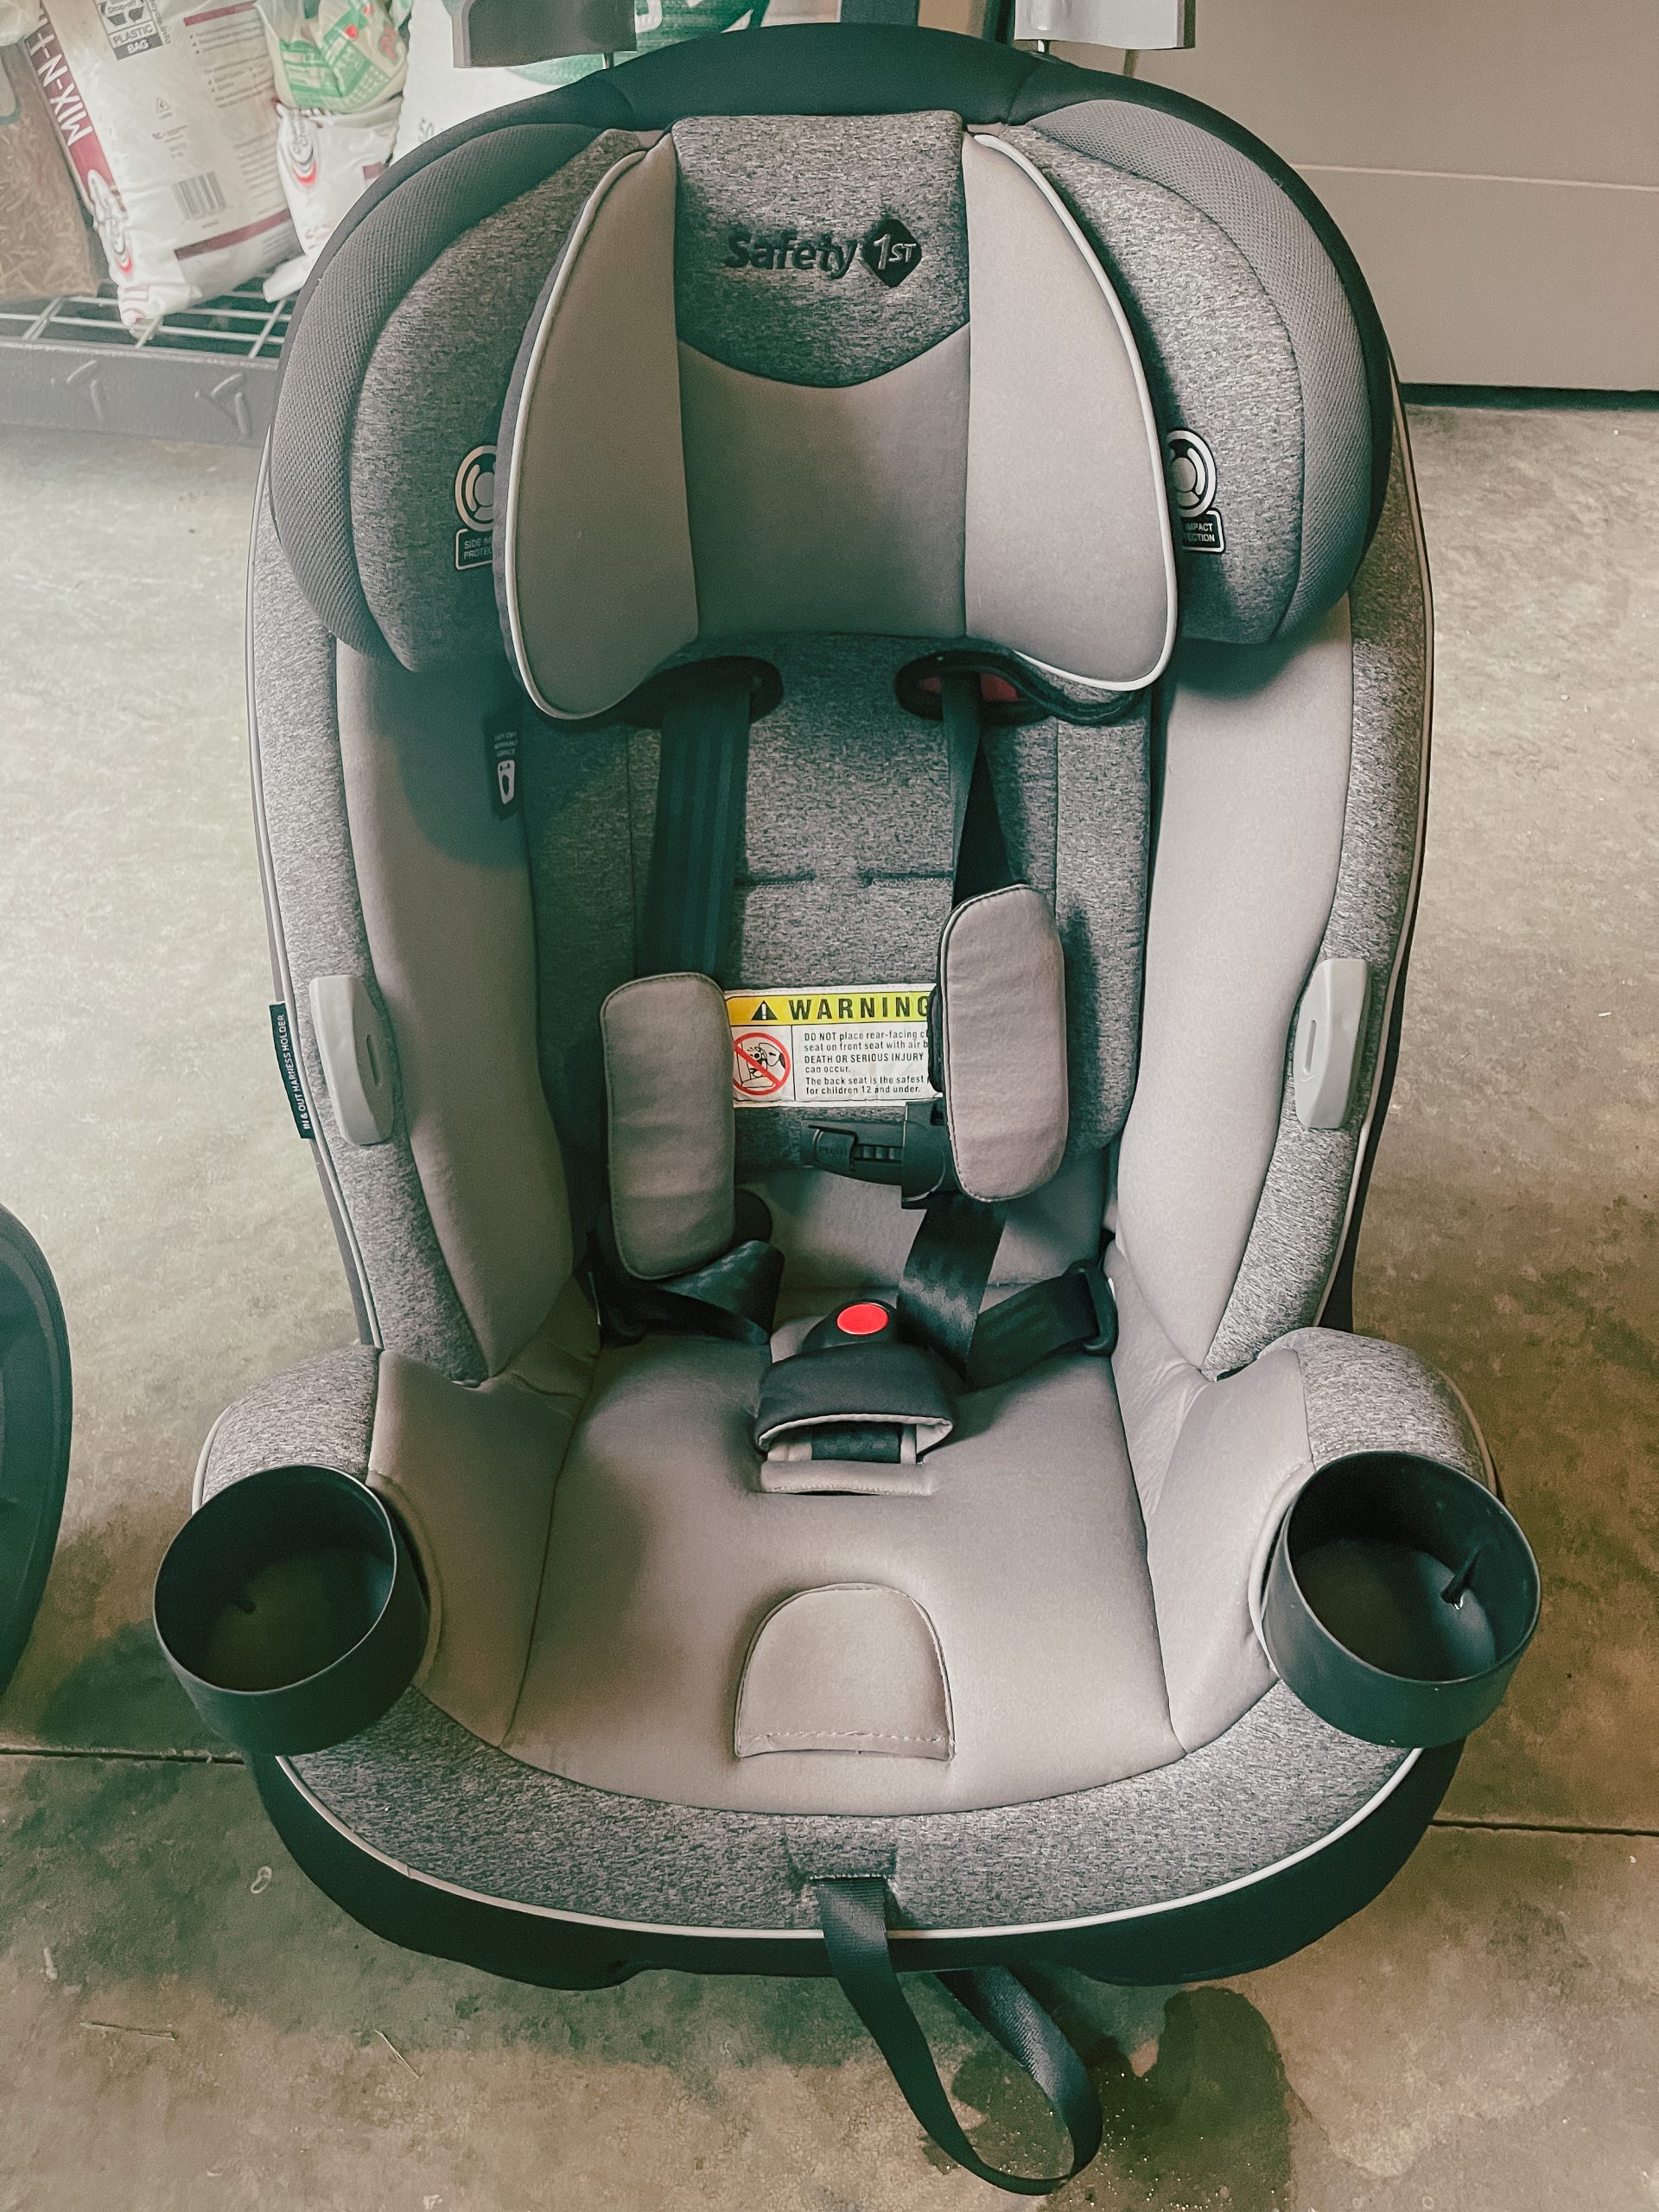 Safety 1st Jive 2-in-1 Convertible Car Seat, Harvest Moon Amazom toddler seat review Angela MacKenlee Lanter